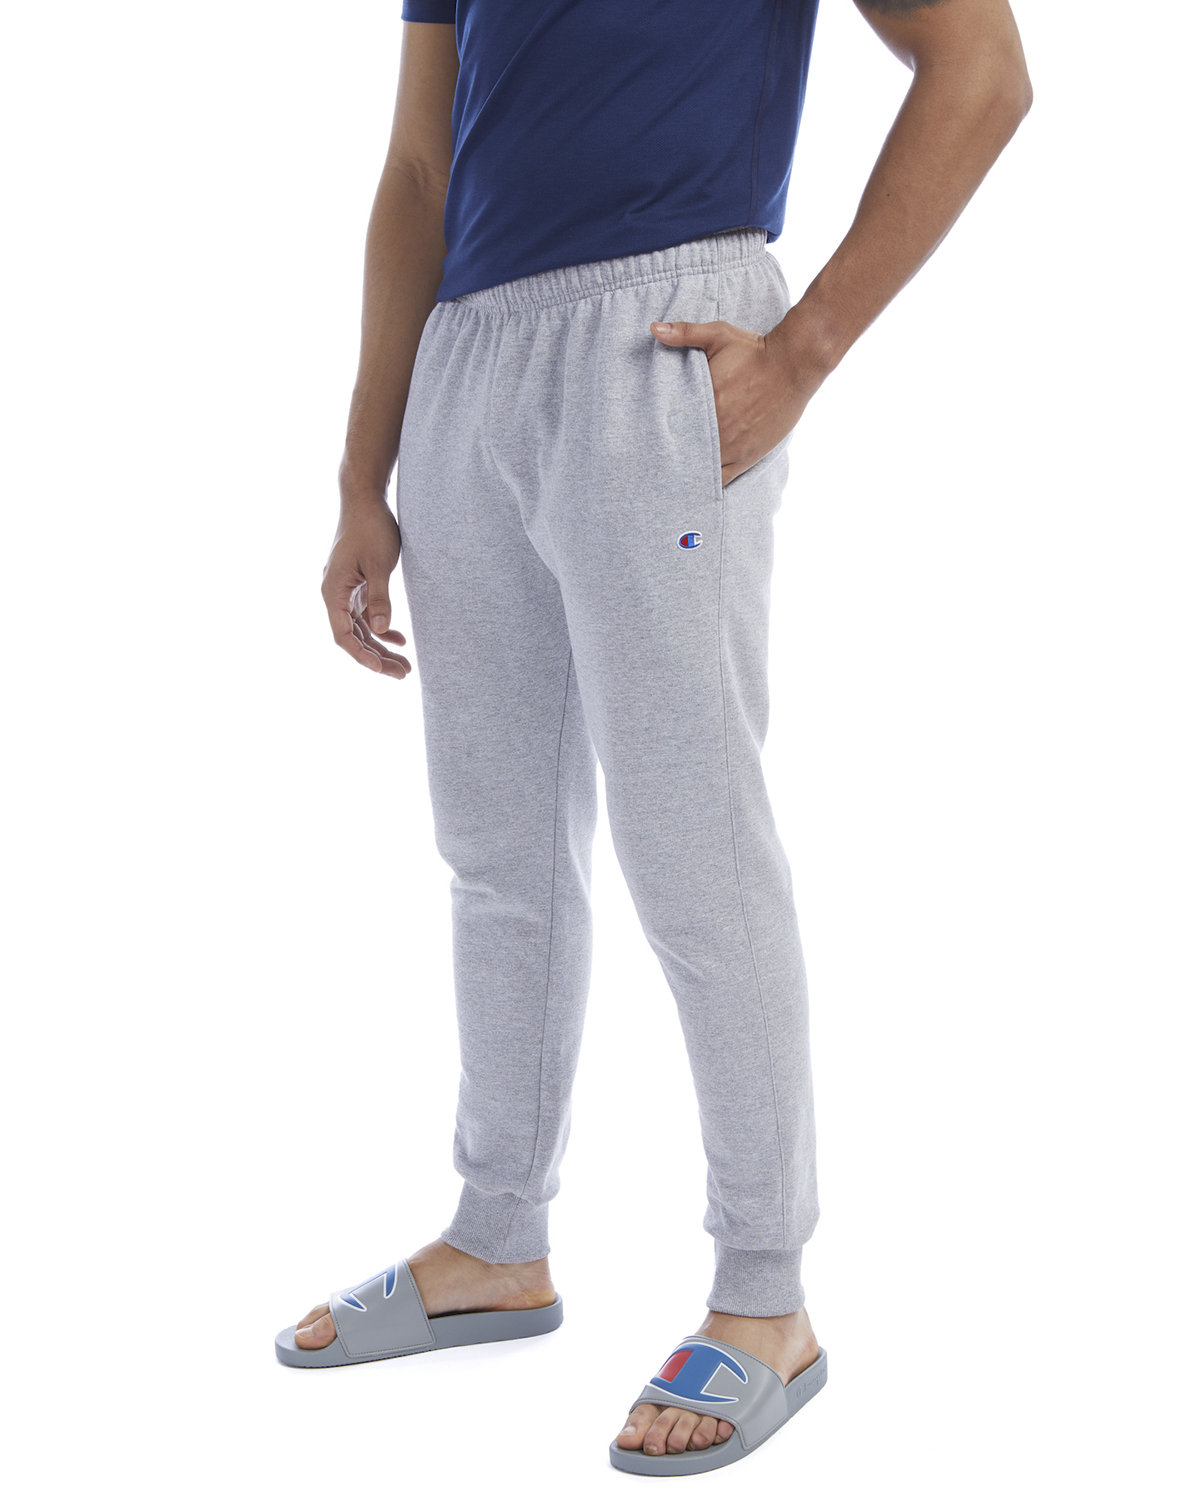 Buy Powerblend Joggers (4-6X) Girls Bottoms from Champion. Find